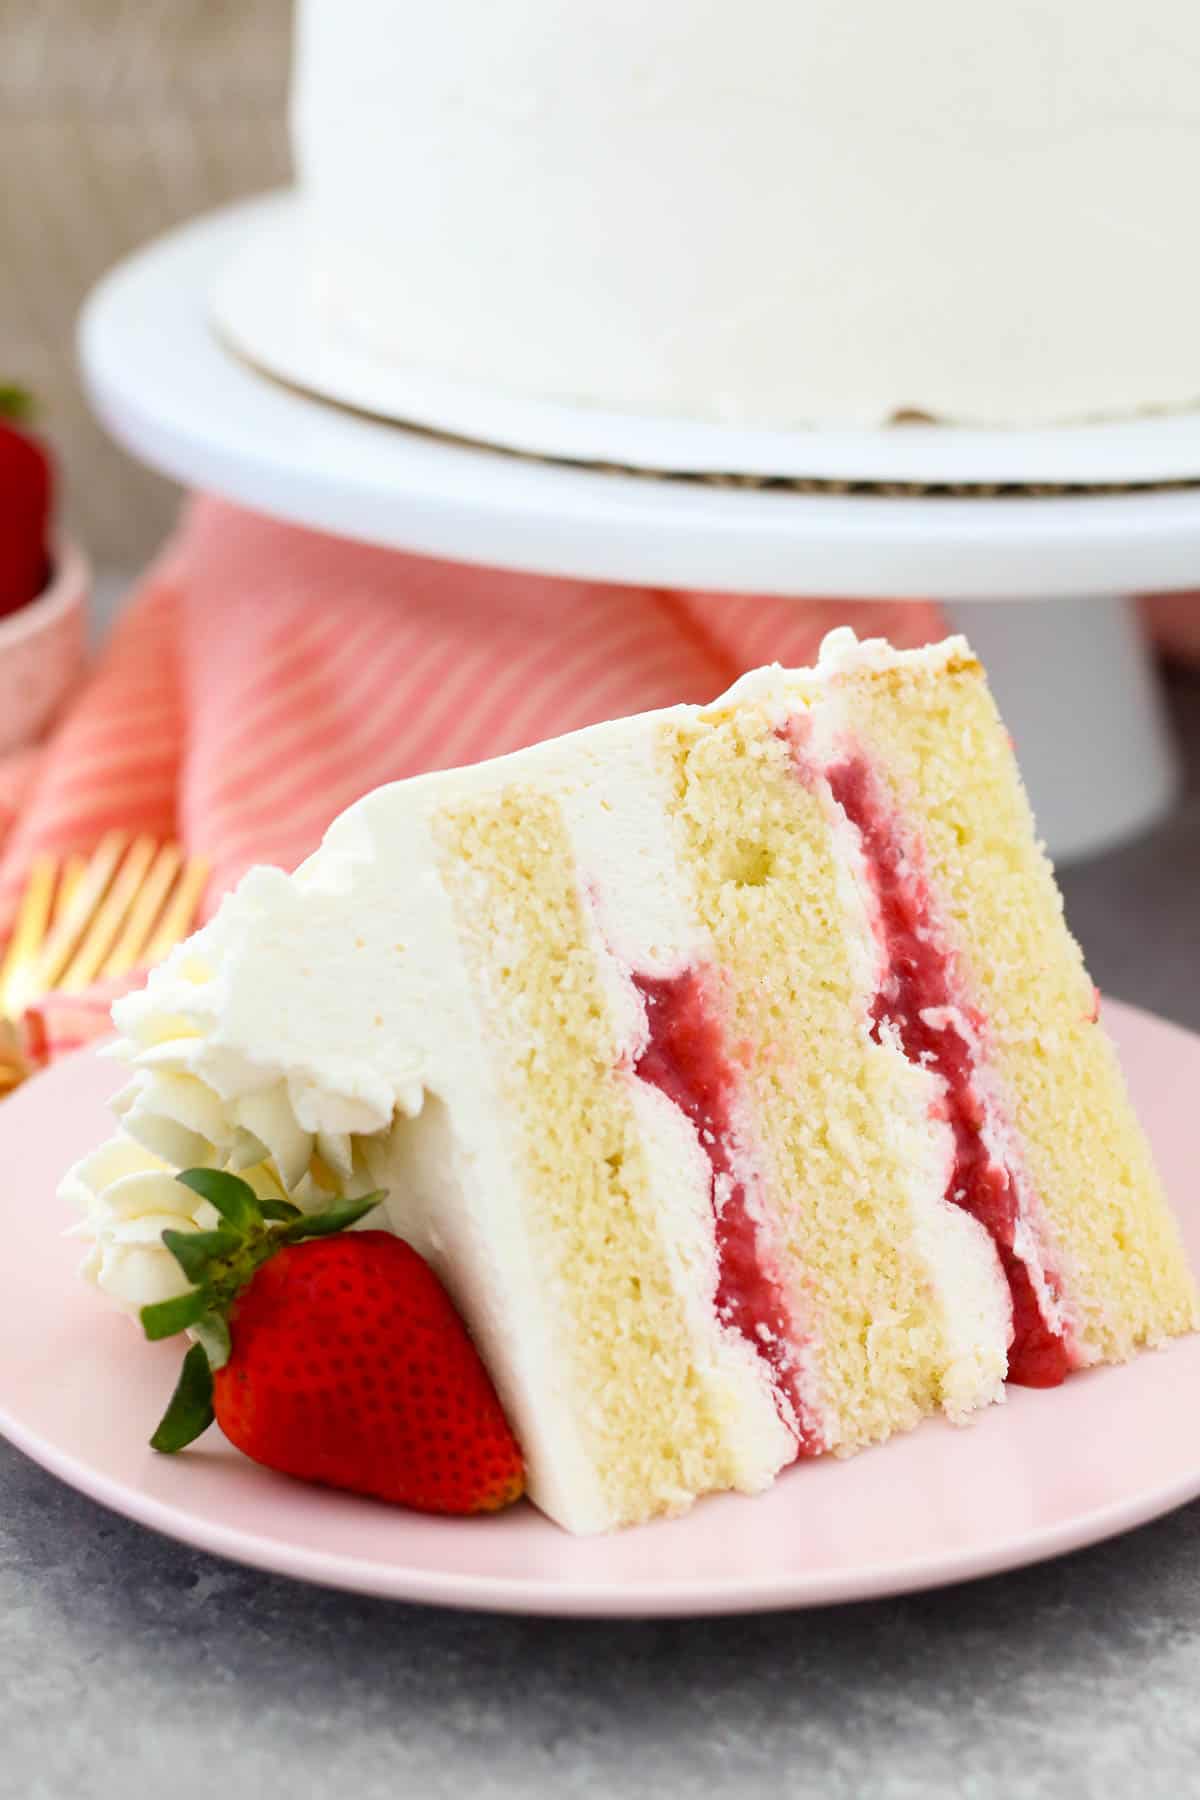 A slice of strawberry mascarpone cake on a pink plate garnished with a fresh strawberry.